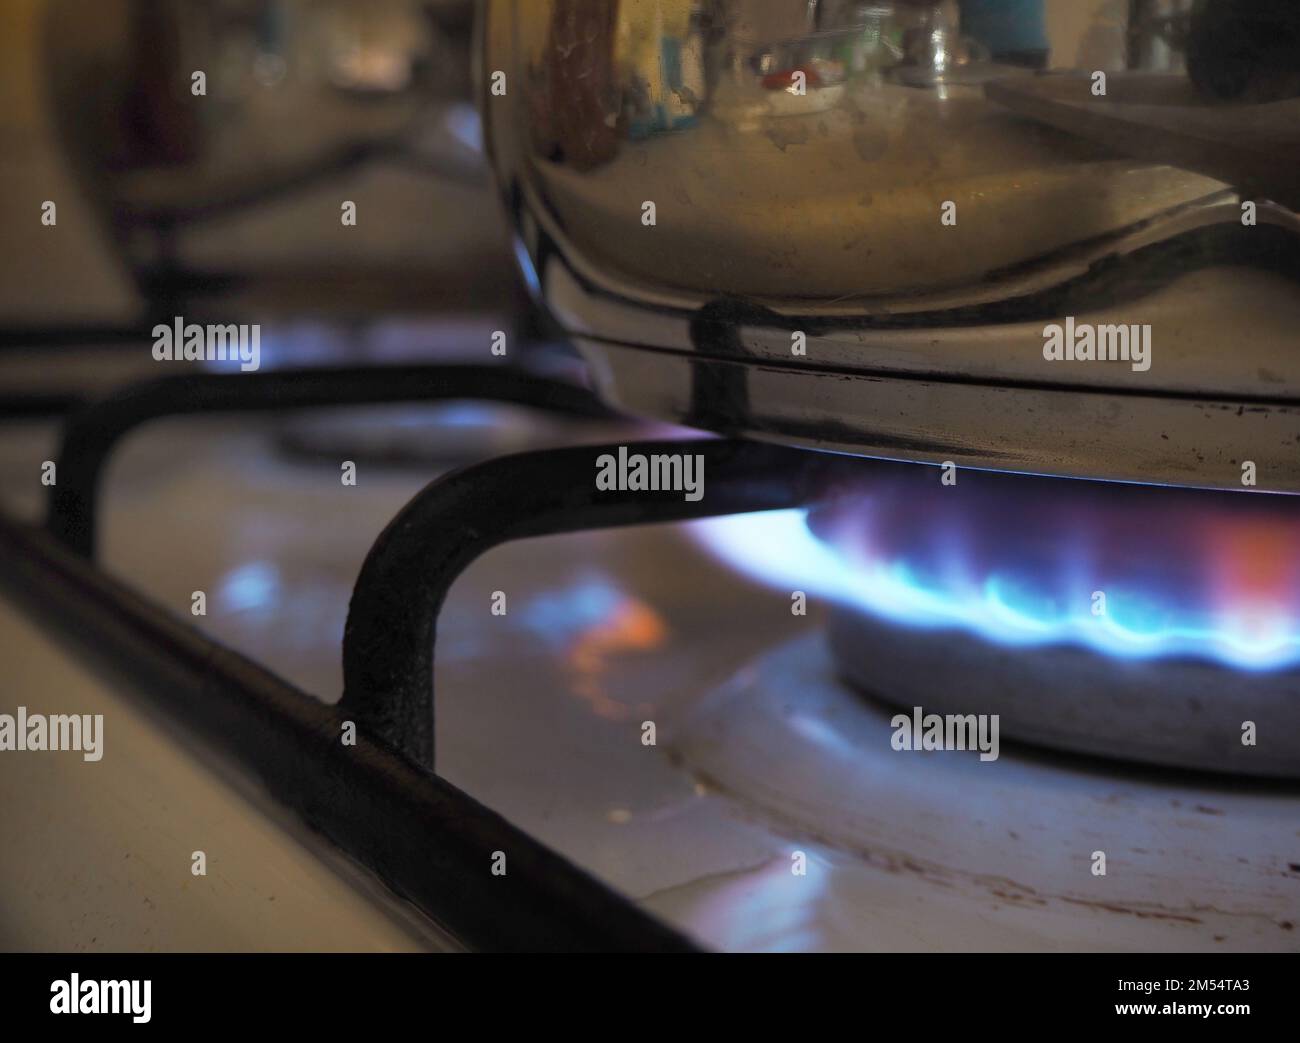 Pot on the gas stove. Burning gas burners. Flames on gas hob. Gas cooker with burning flames of propane gas Stock Photo